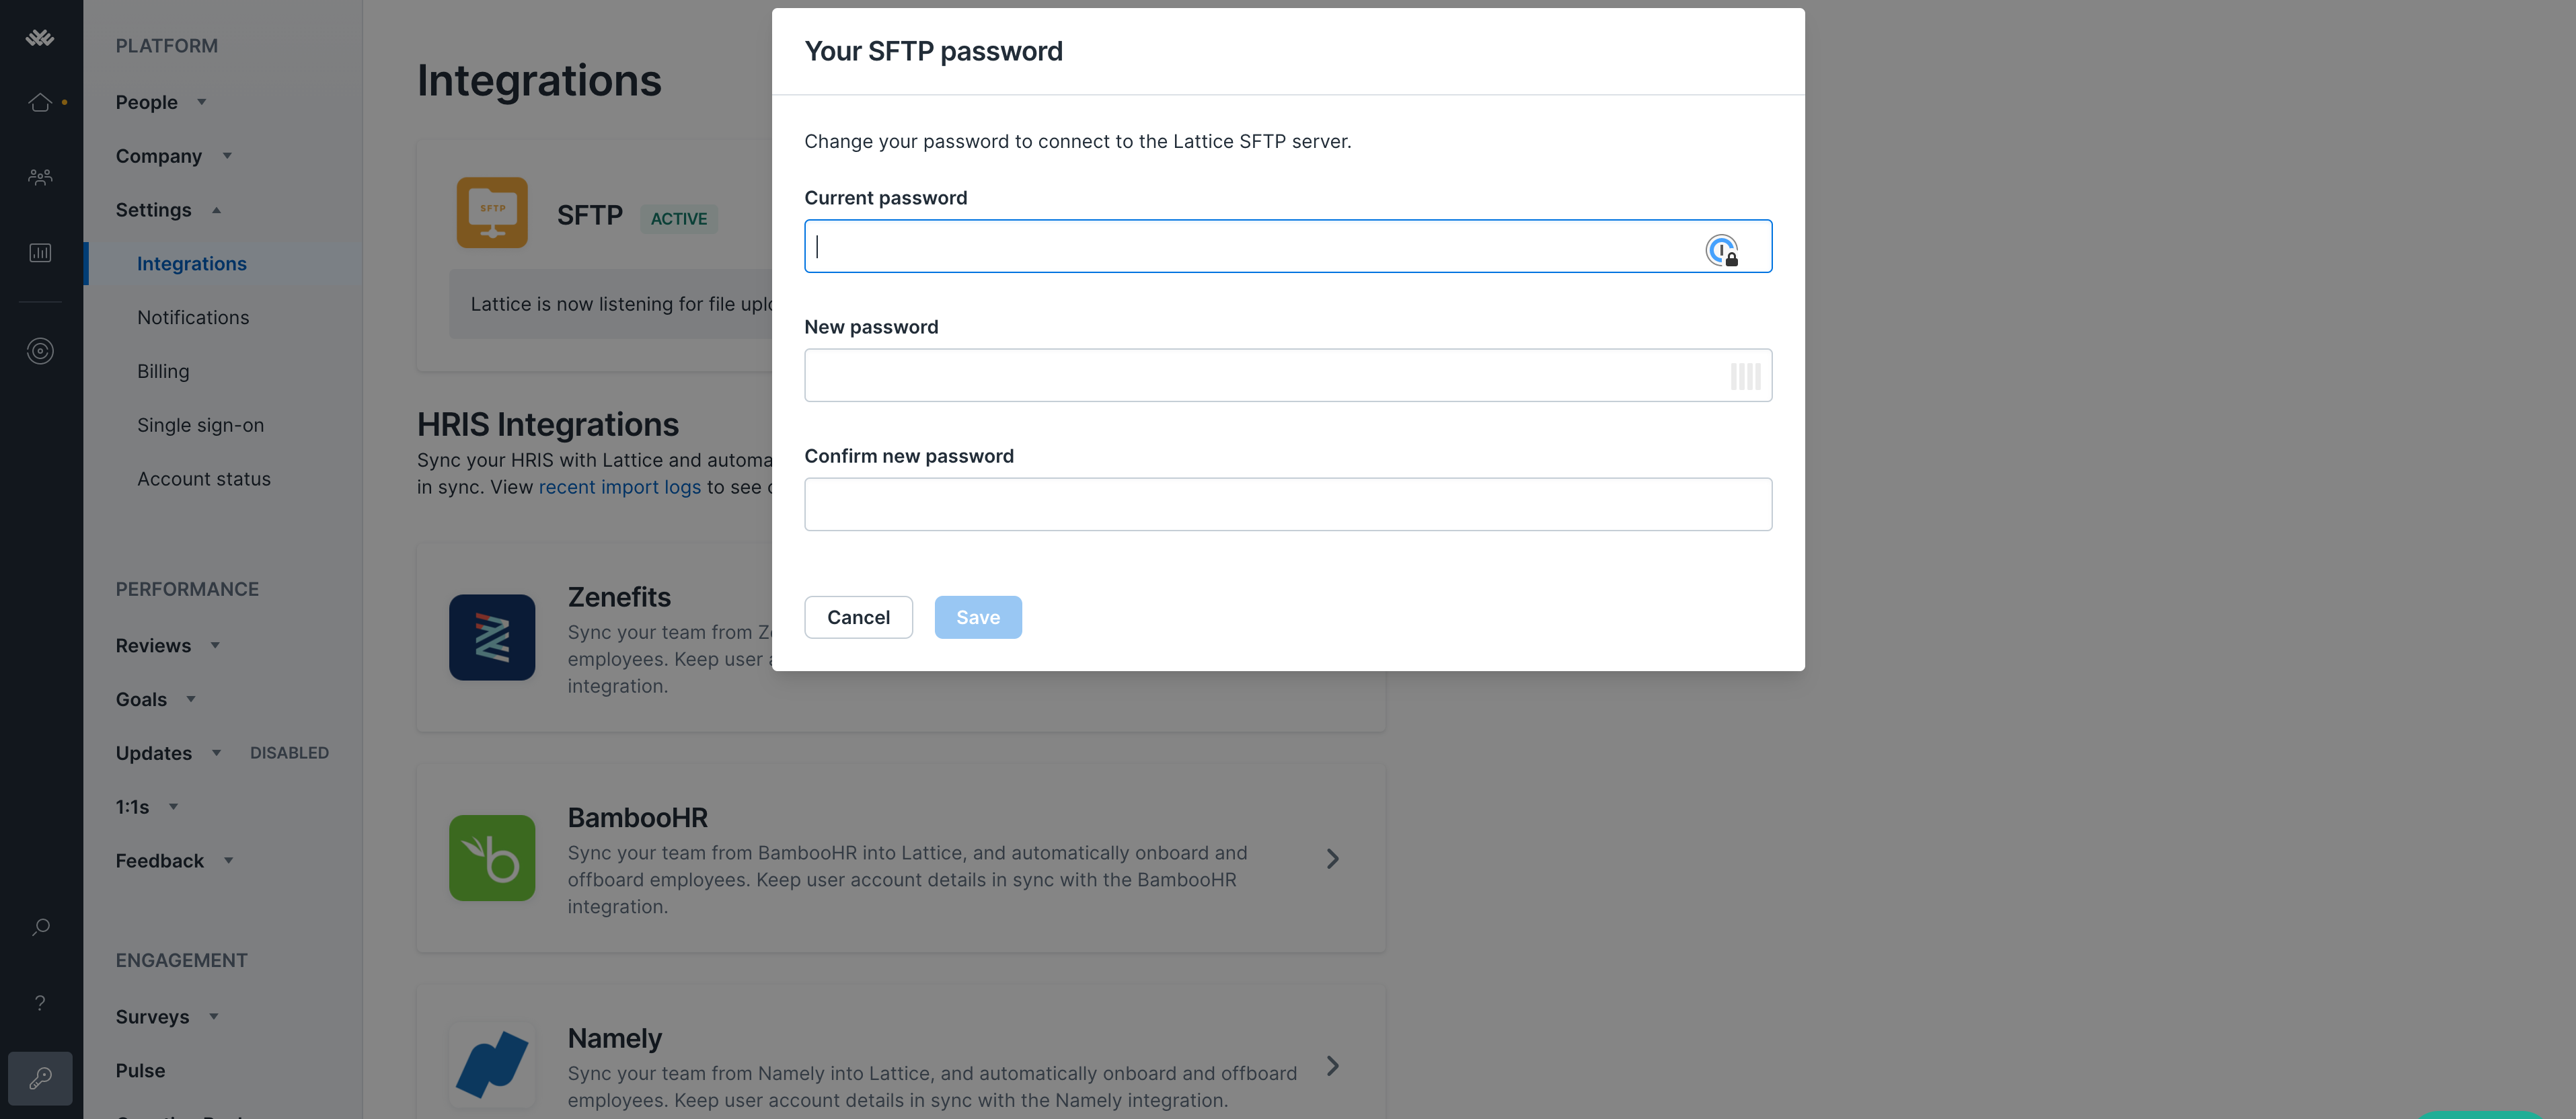 Screenshot of Your SFTP Password popup in Lattice with text boxes for Current Password, New Password, and Confirm New Password.